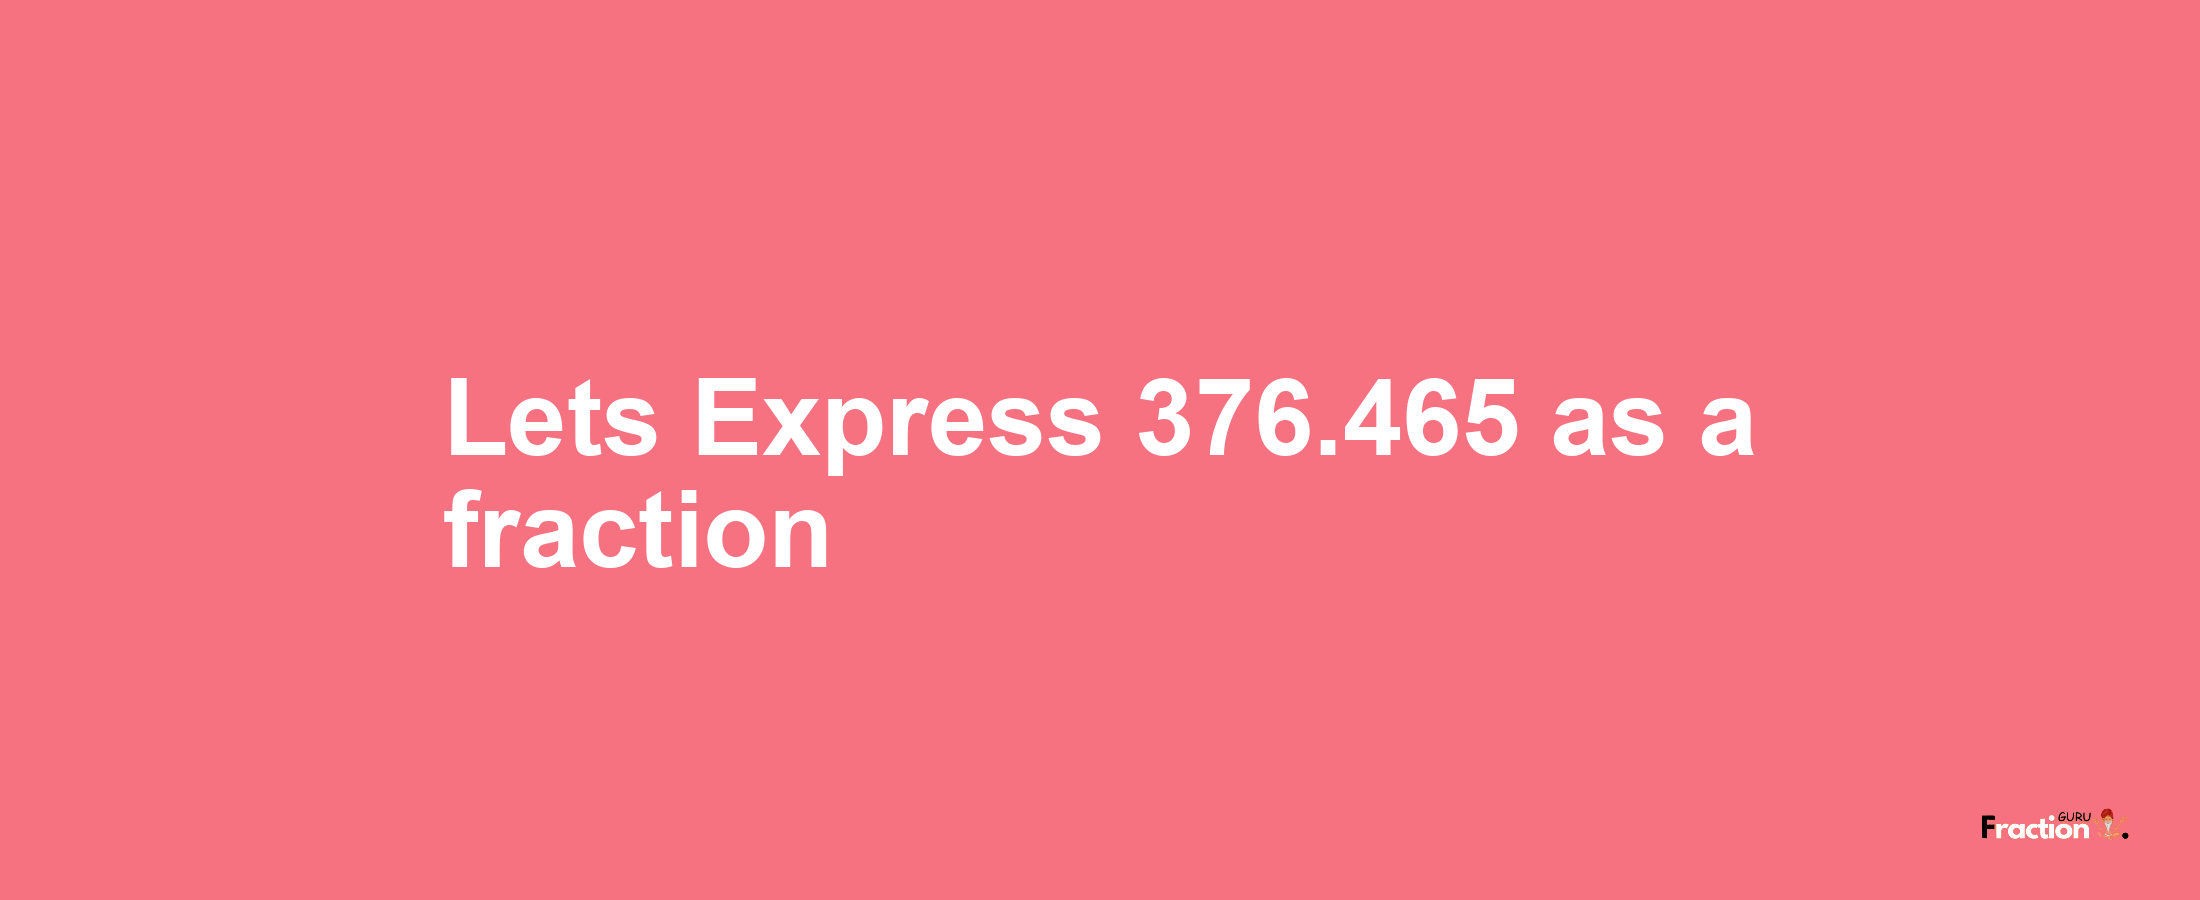 Lets Express 376.465 as afraction